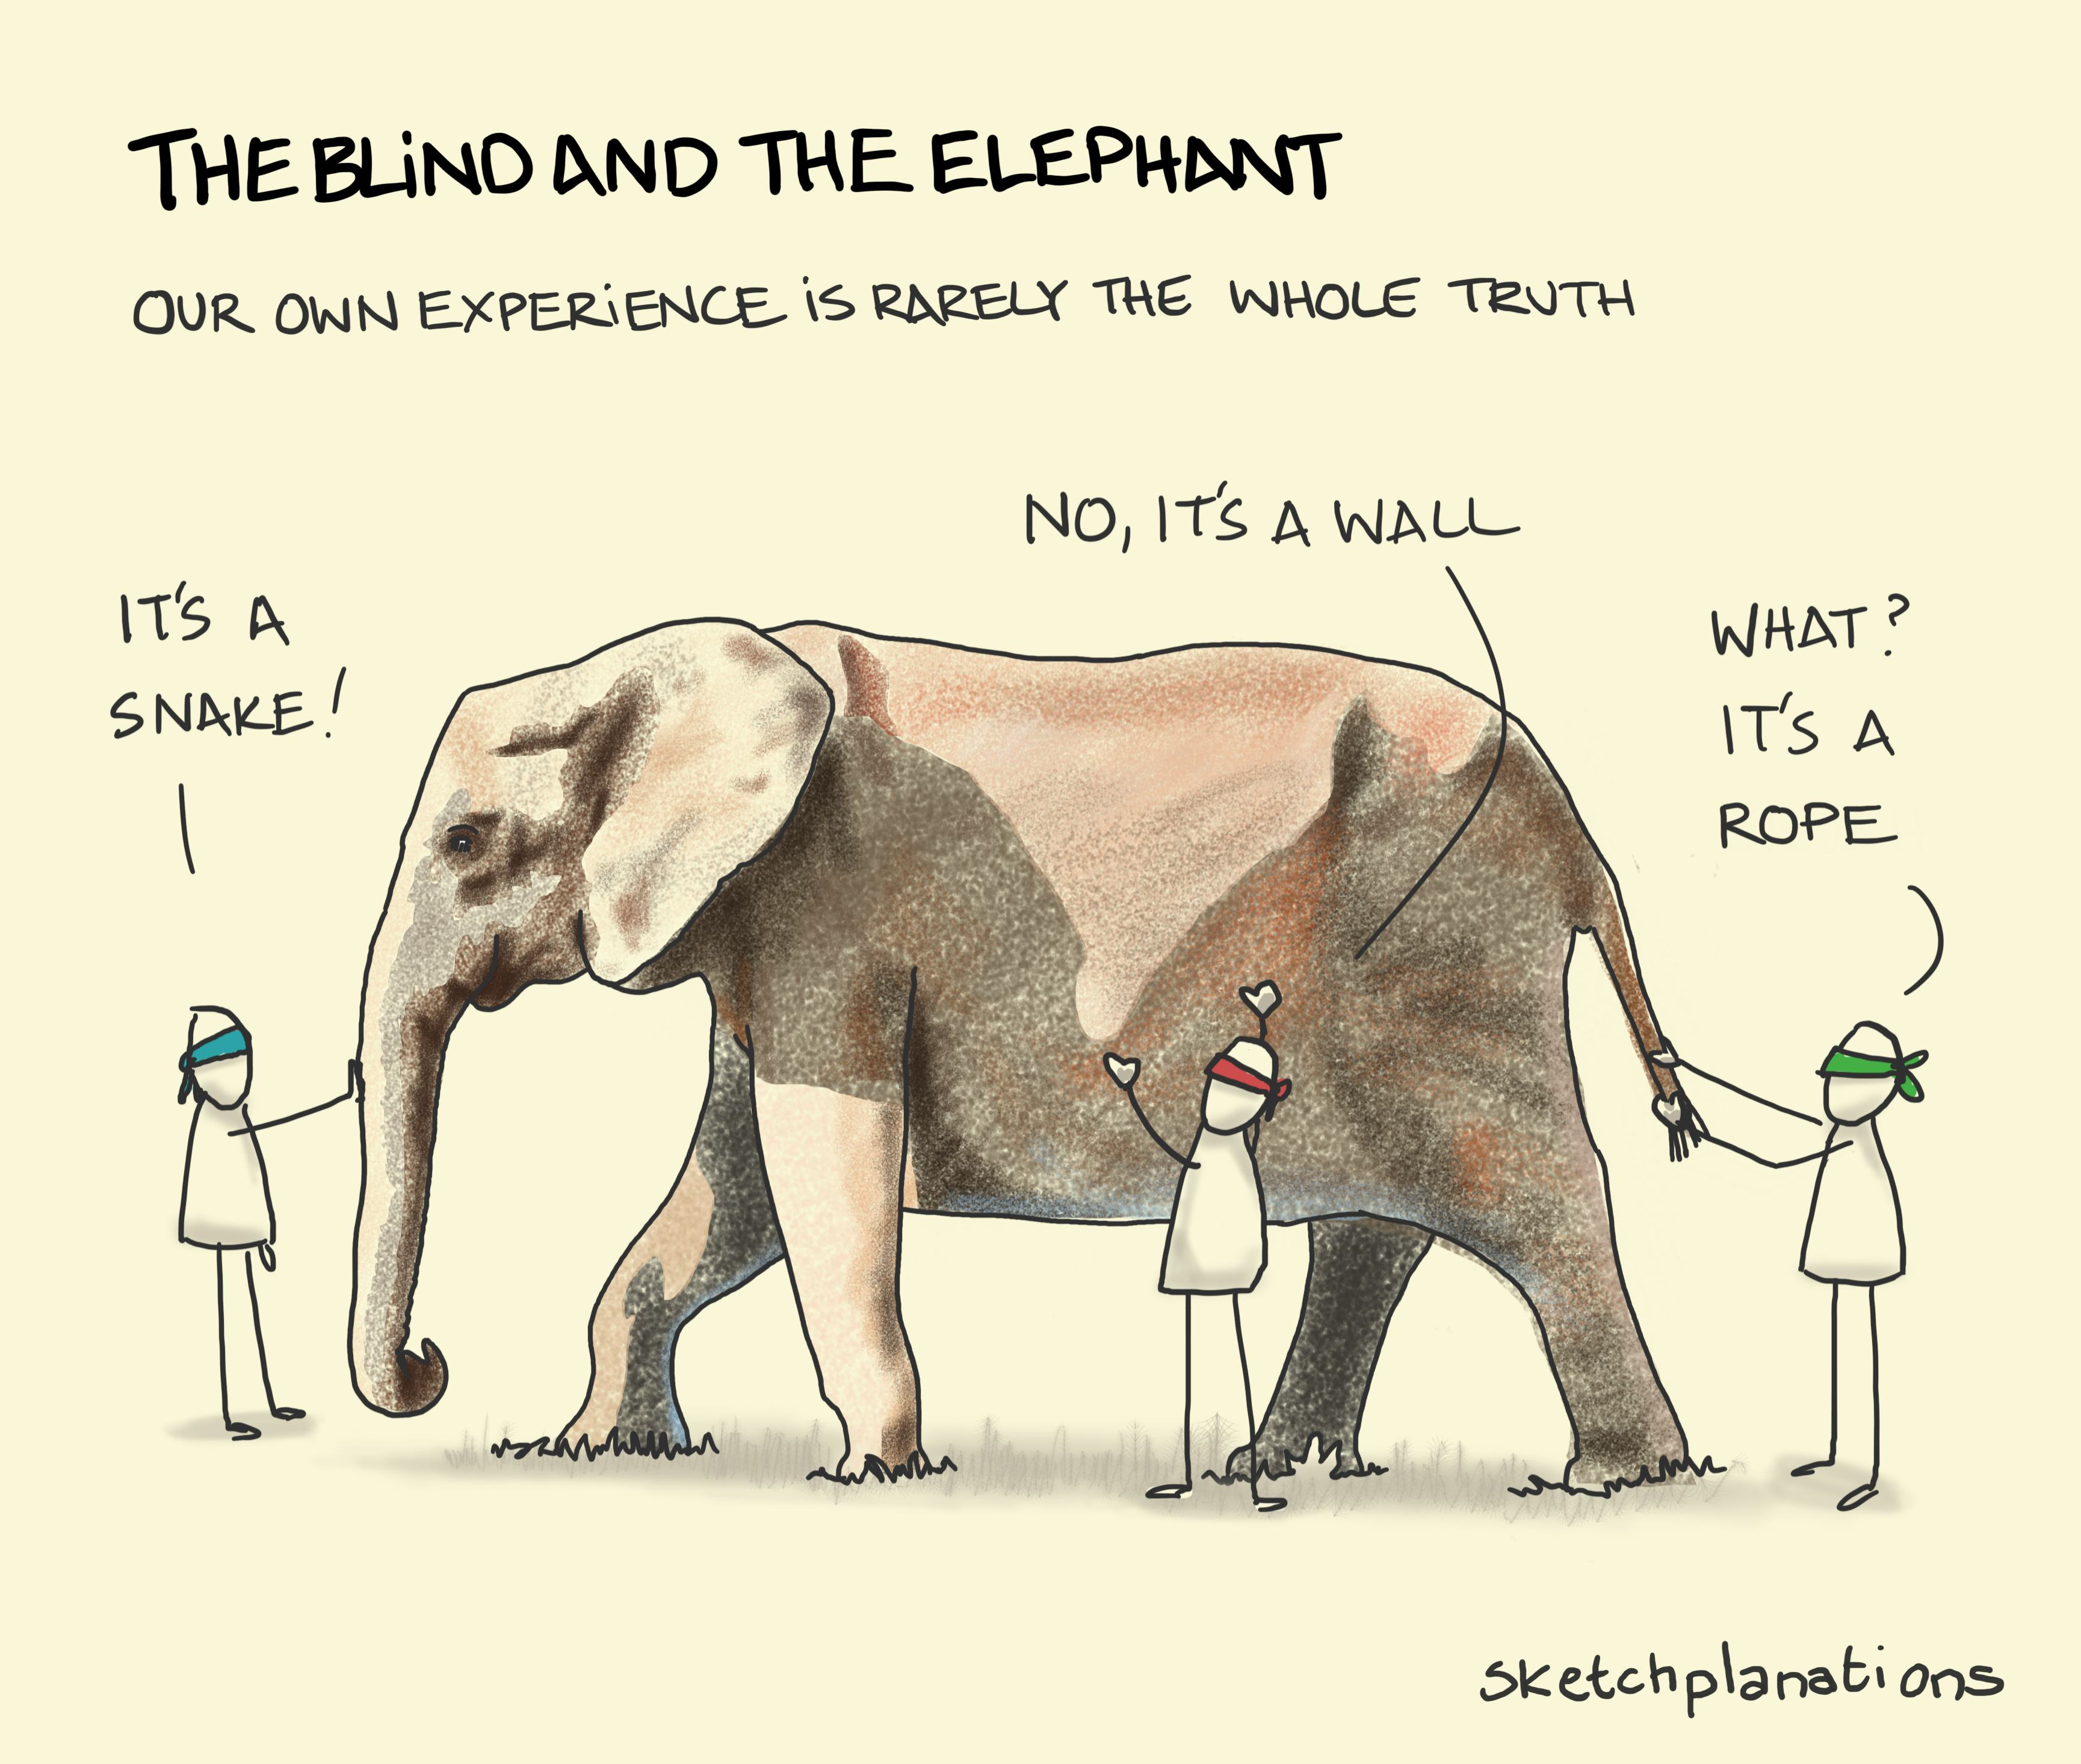 The blind and the elephant - Sketchplanations